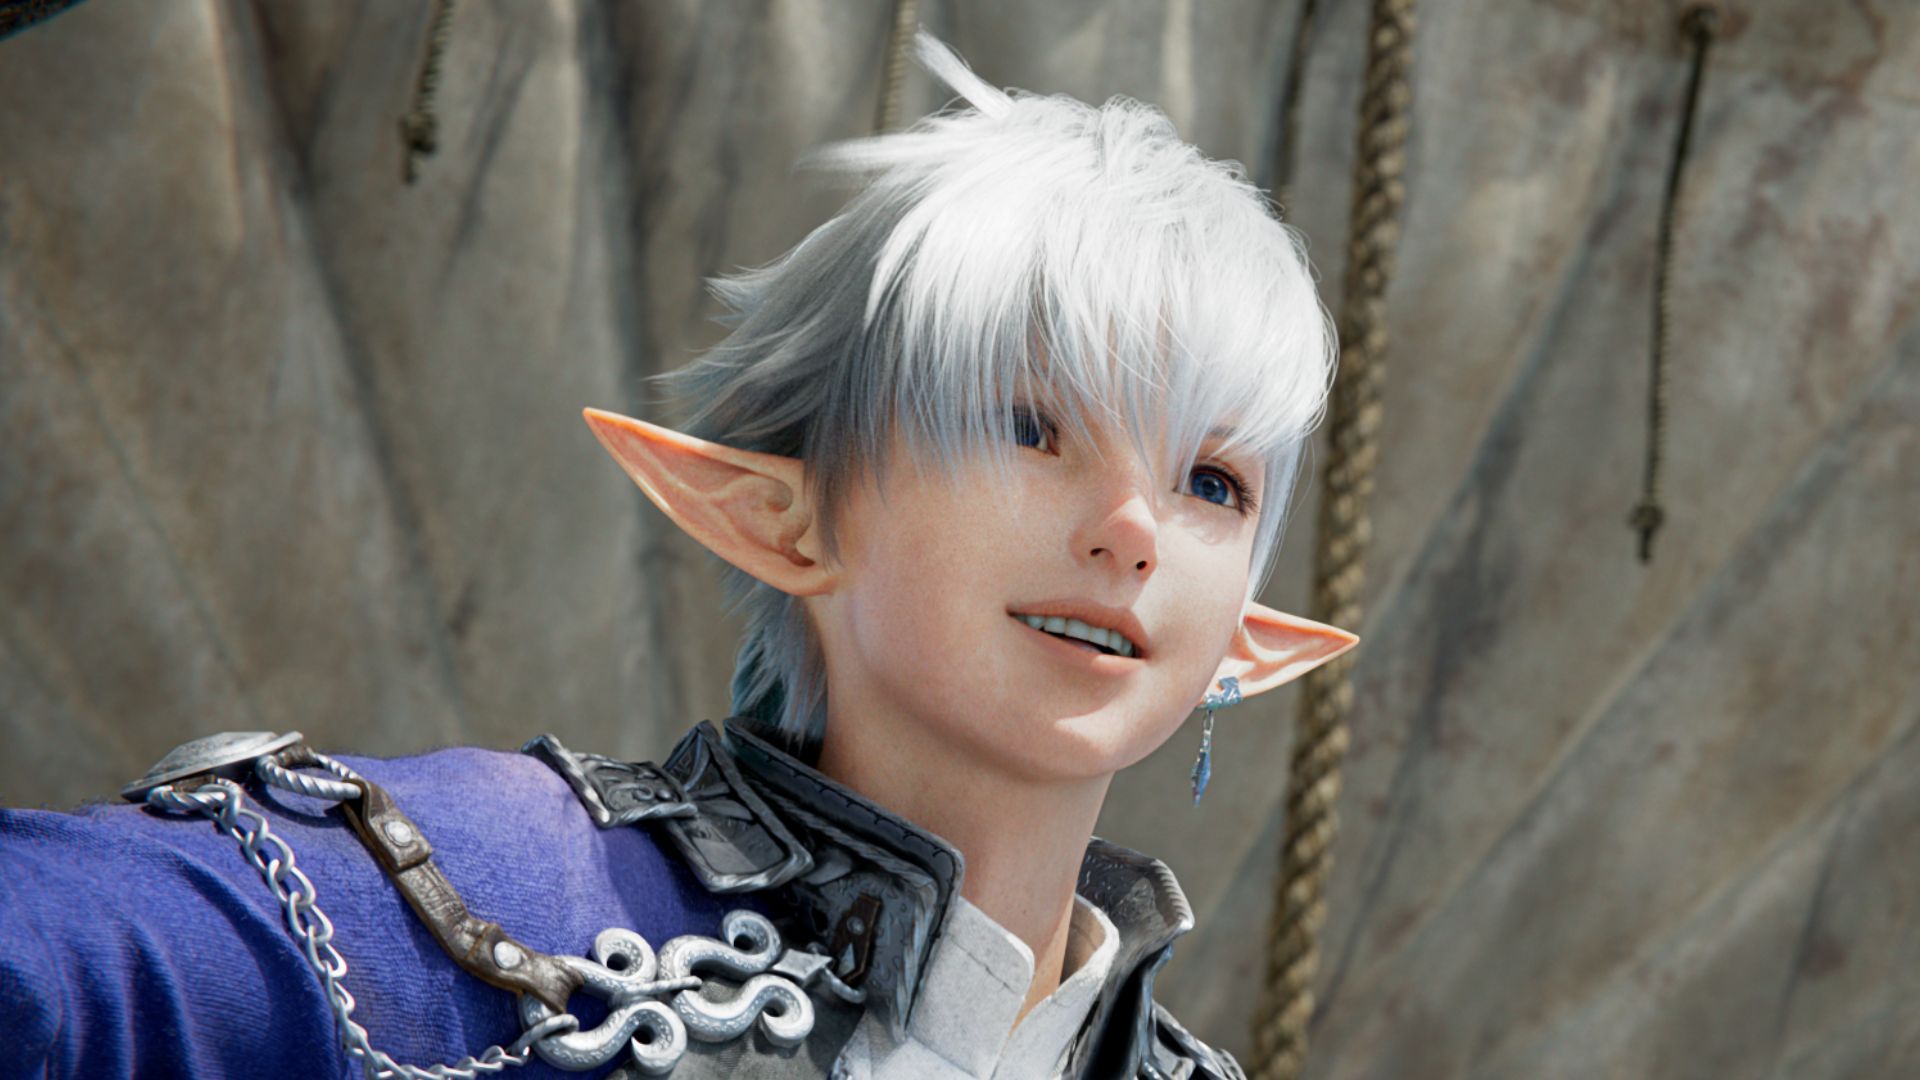 Final Fantasy 14's director wants to make the MMO more stressful